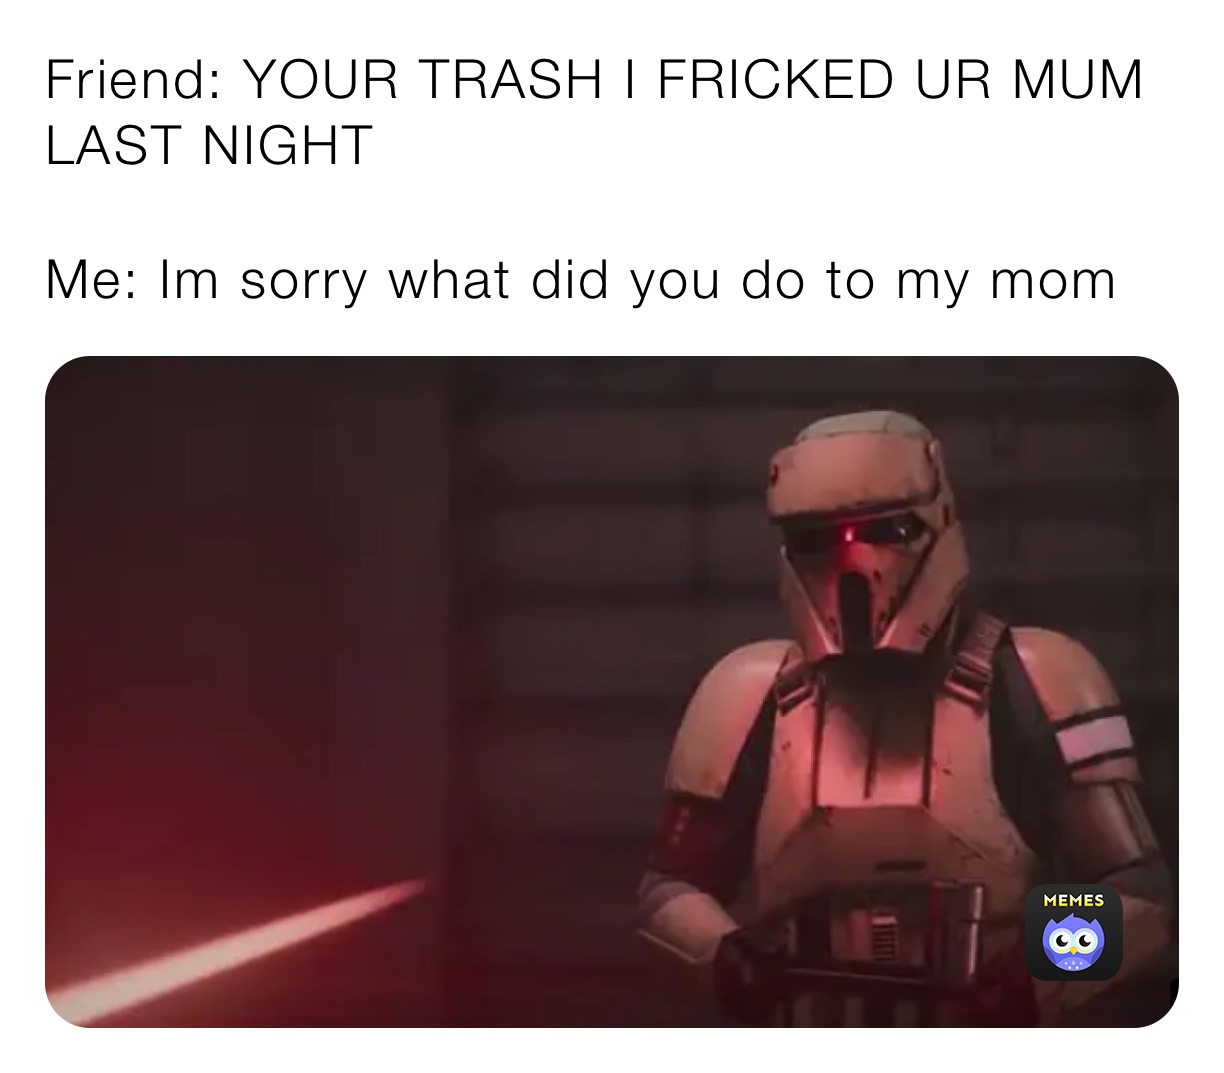 Friend: YOUR TRASH I FRICKED UR MUM LAST NIGHT

Me: Im sorry what did you do to my mom